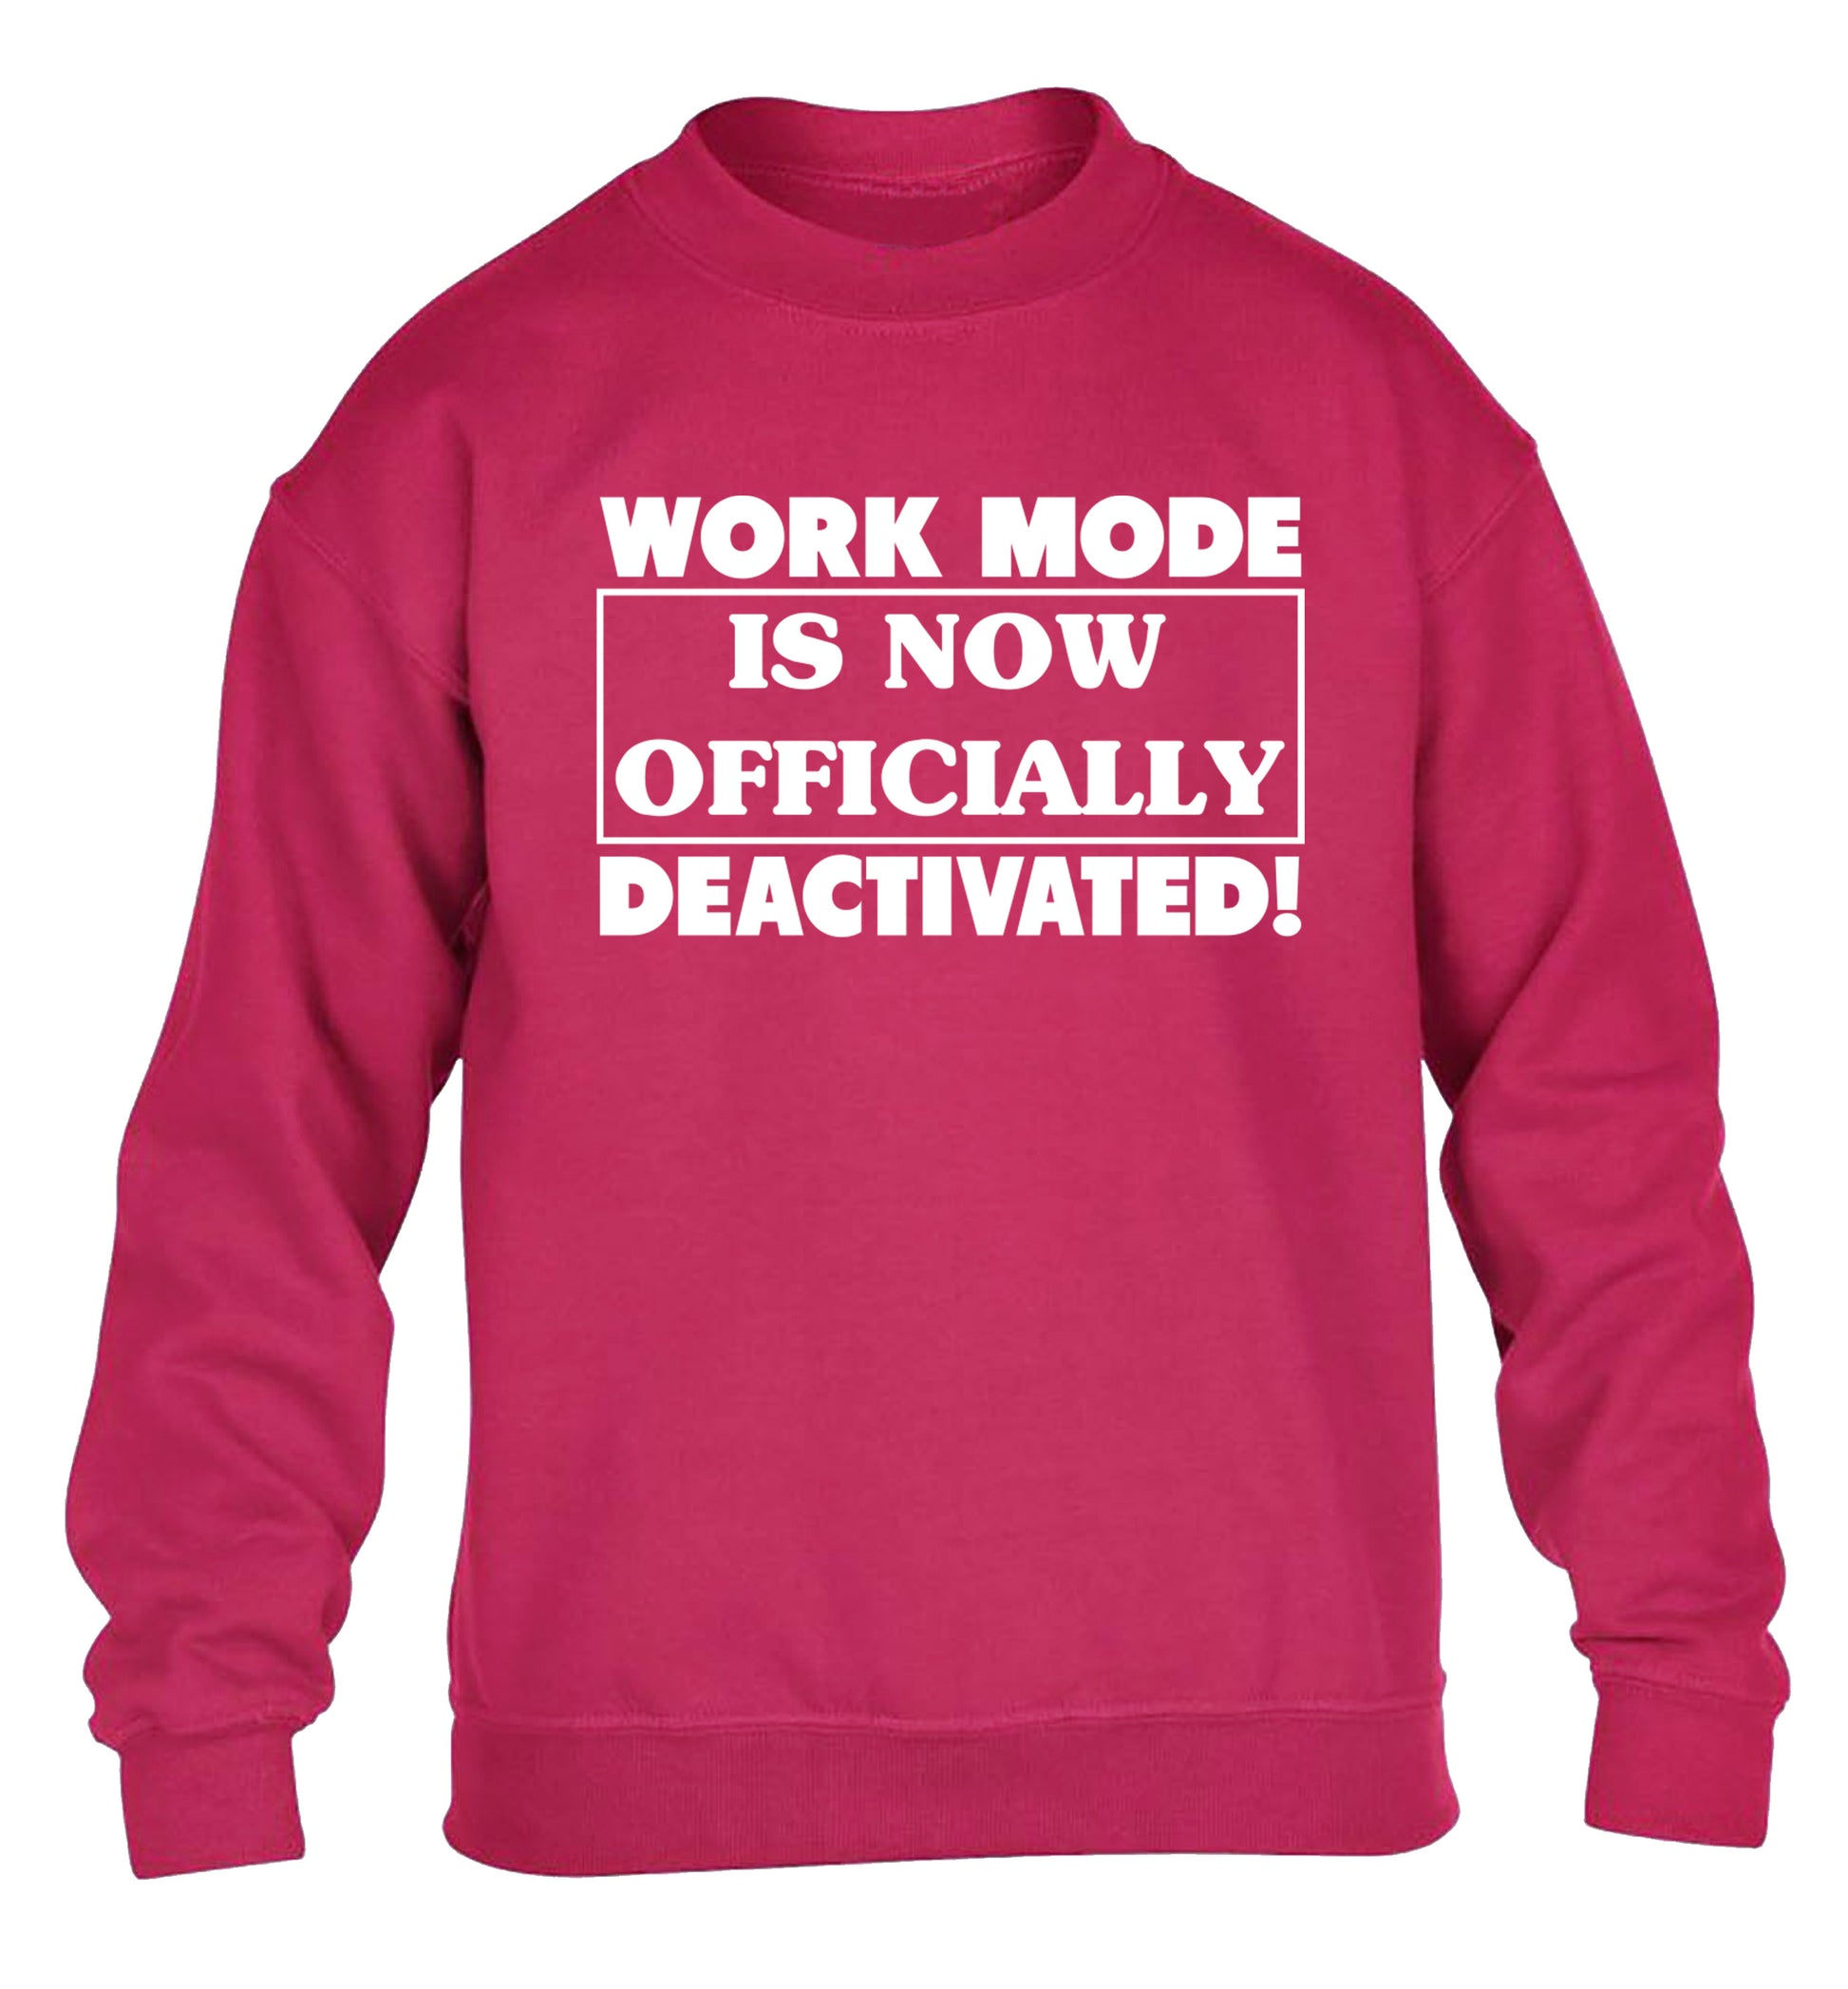 Work mode is now officially deactivated children's pink sweater 12-13 Years